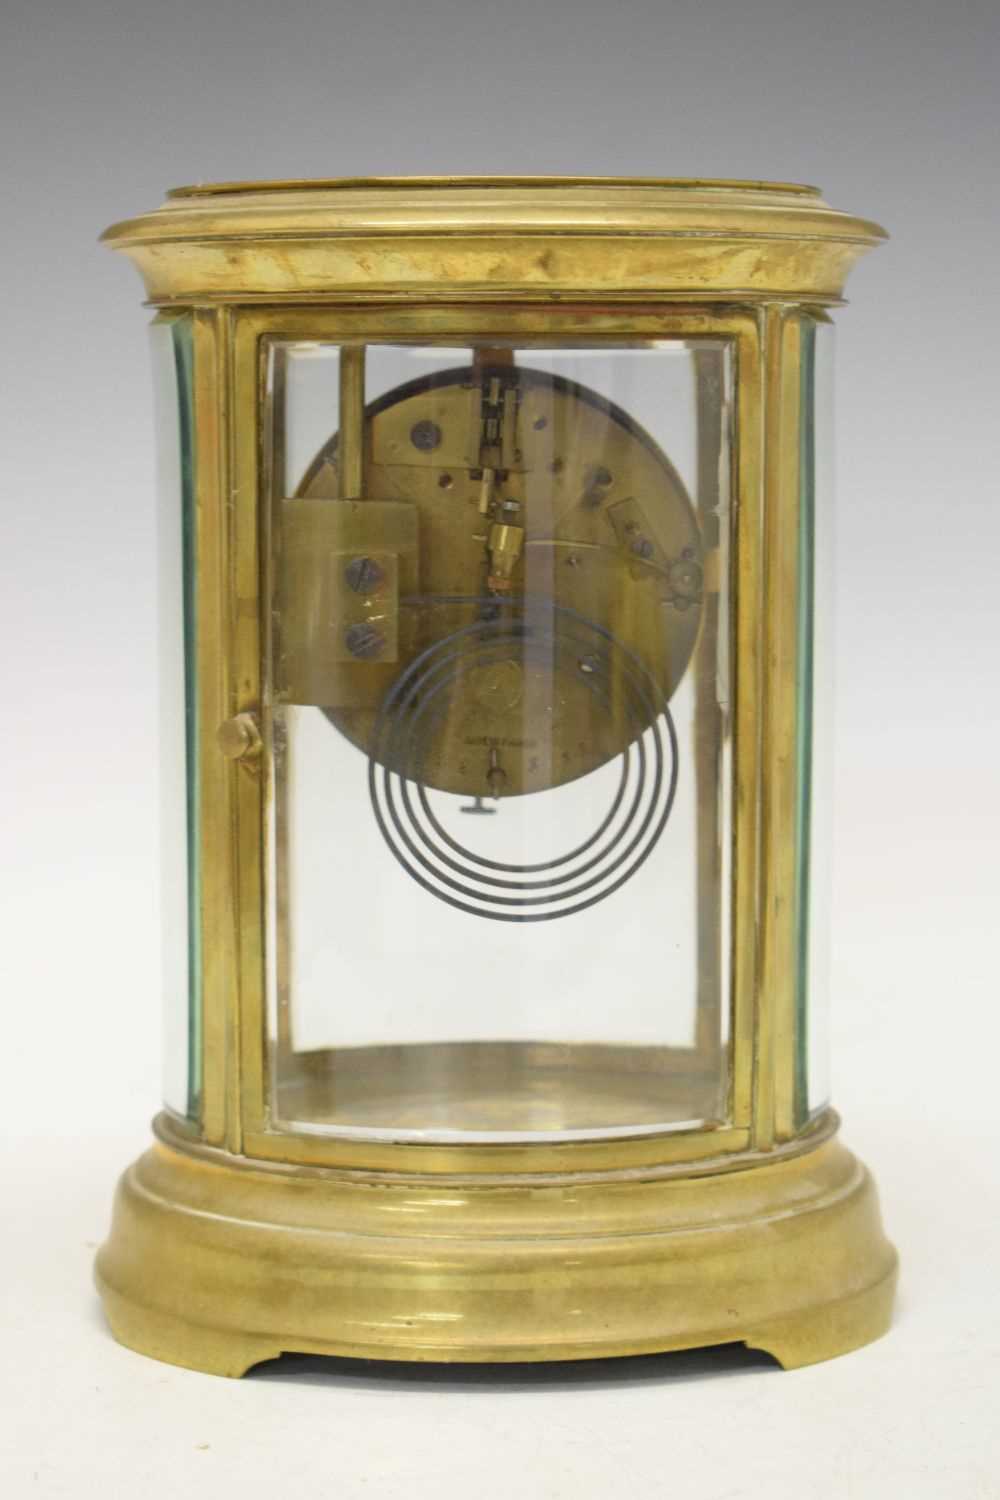 Late 19th or early 20th Century French oval four glass mantel clock - Image 3 of 5